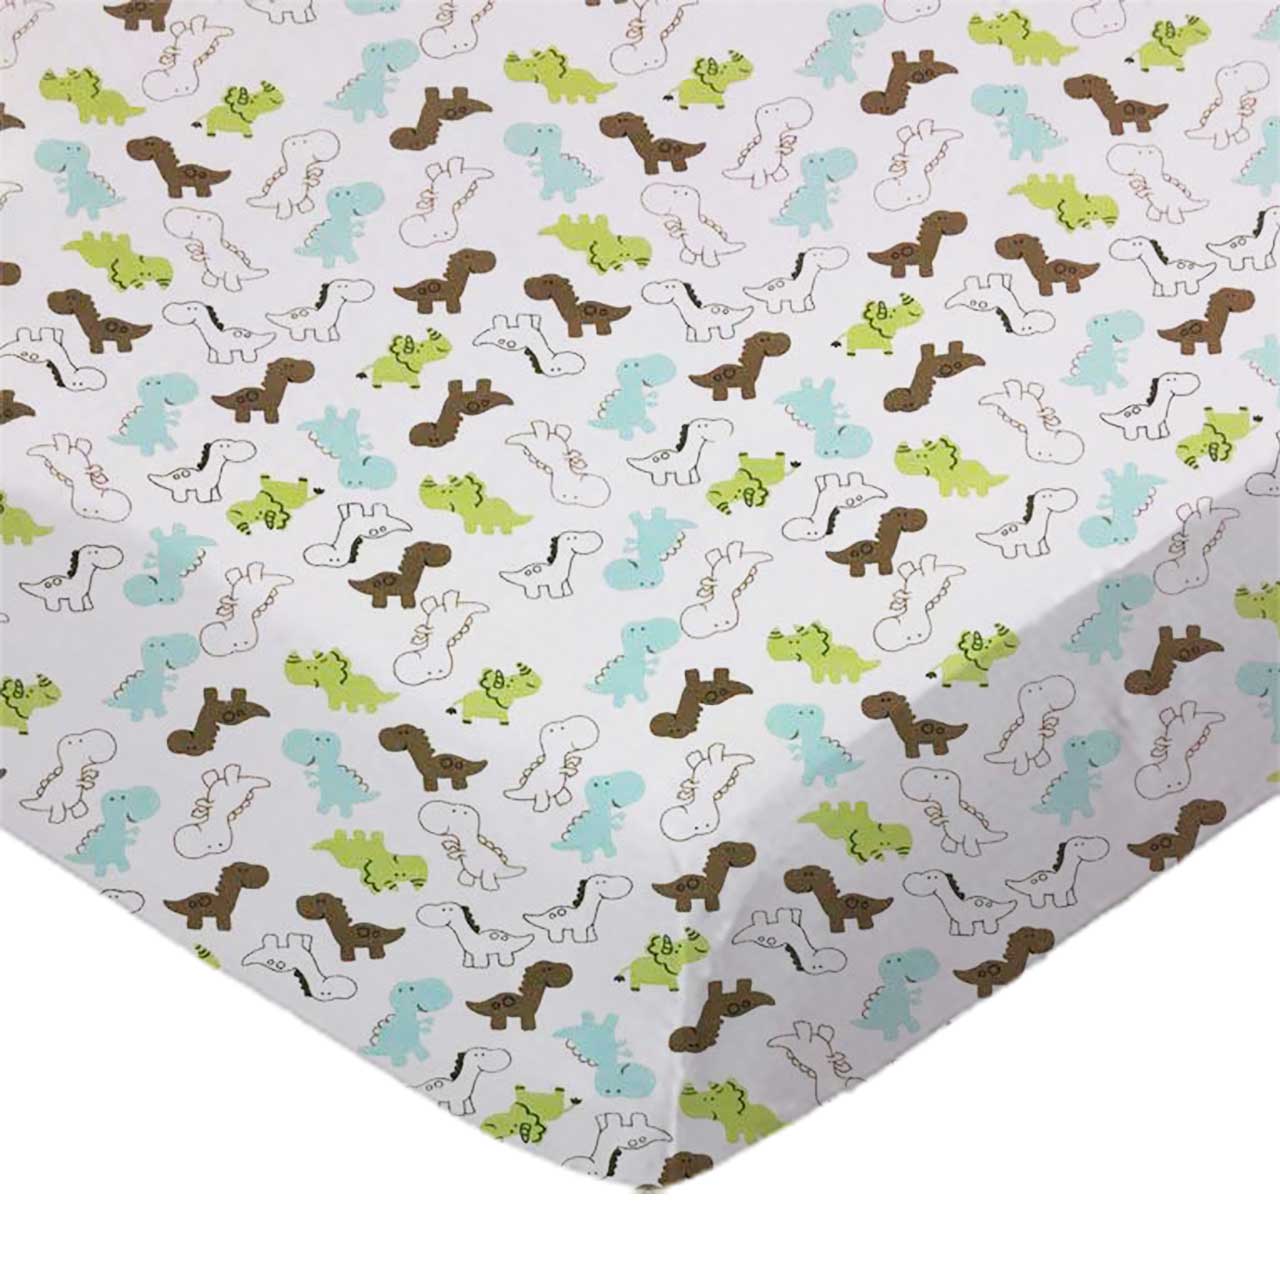 SheetWorld Fitted Crib Sheet - 100% Cotton Jersey - Baby Dinosaurs,